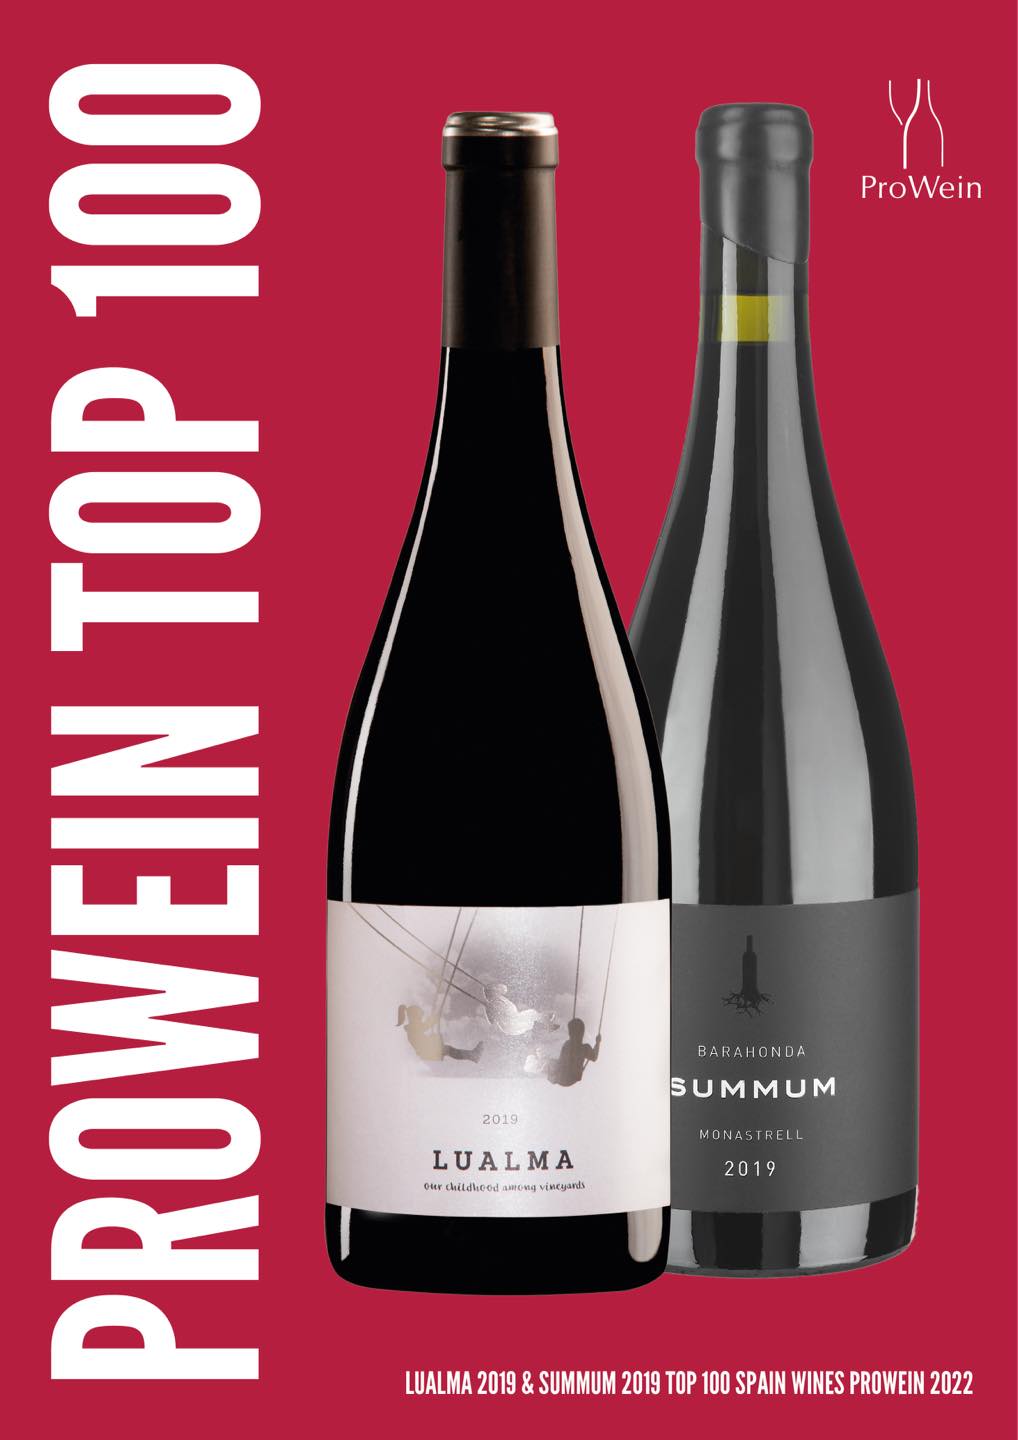 ProWein 2022 includes two wines from Barahonda among the 100 best in Spain